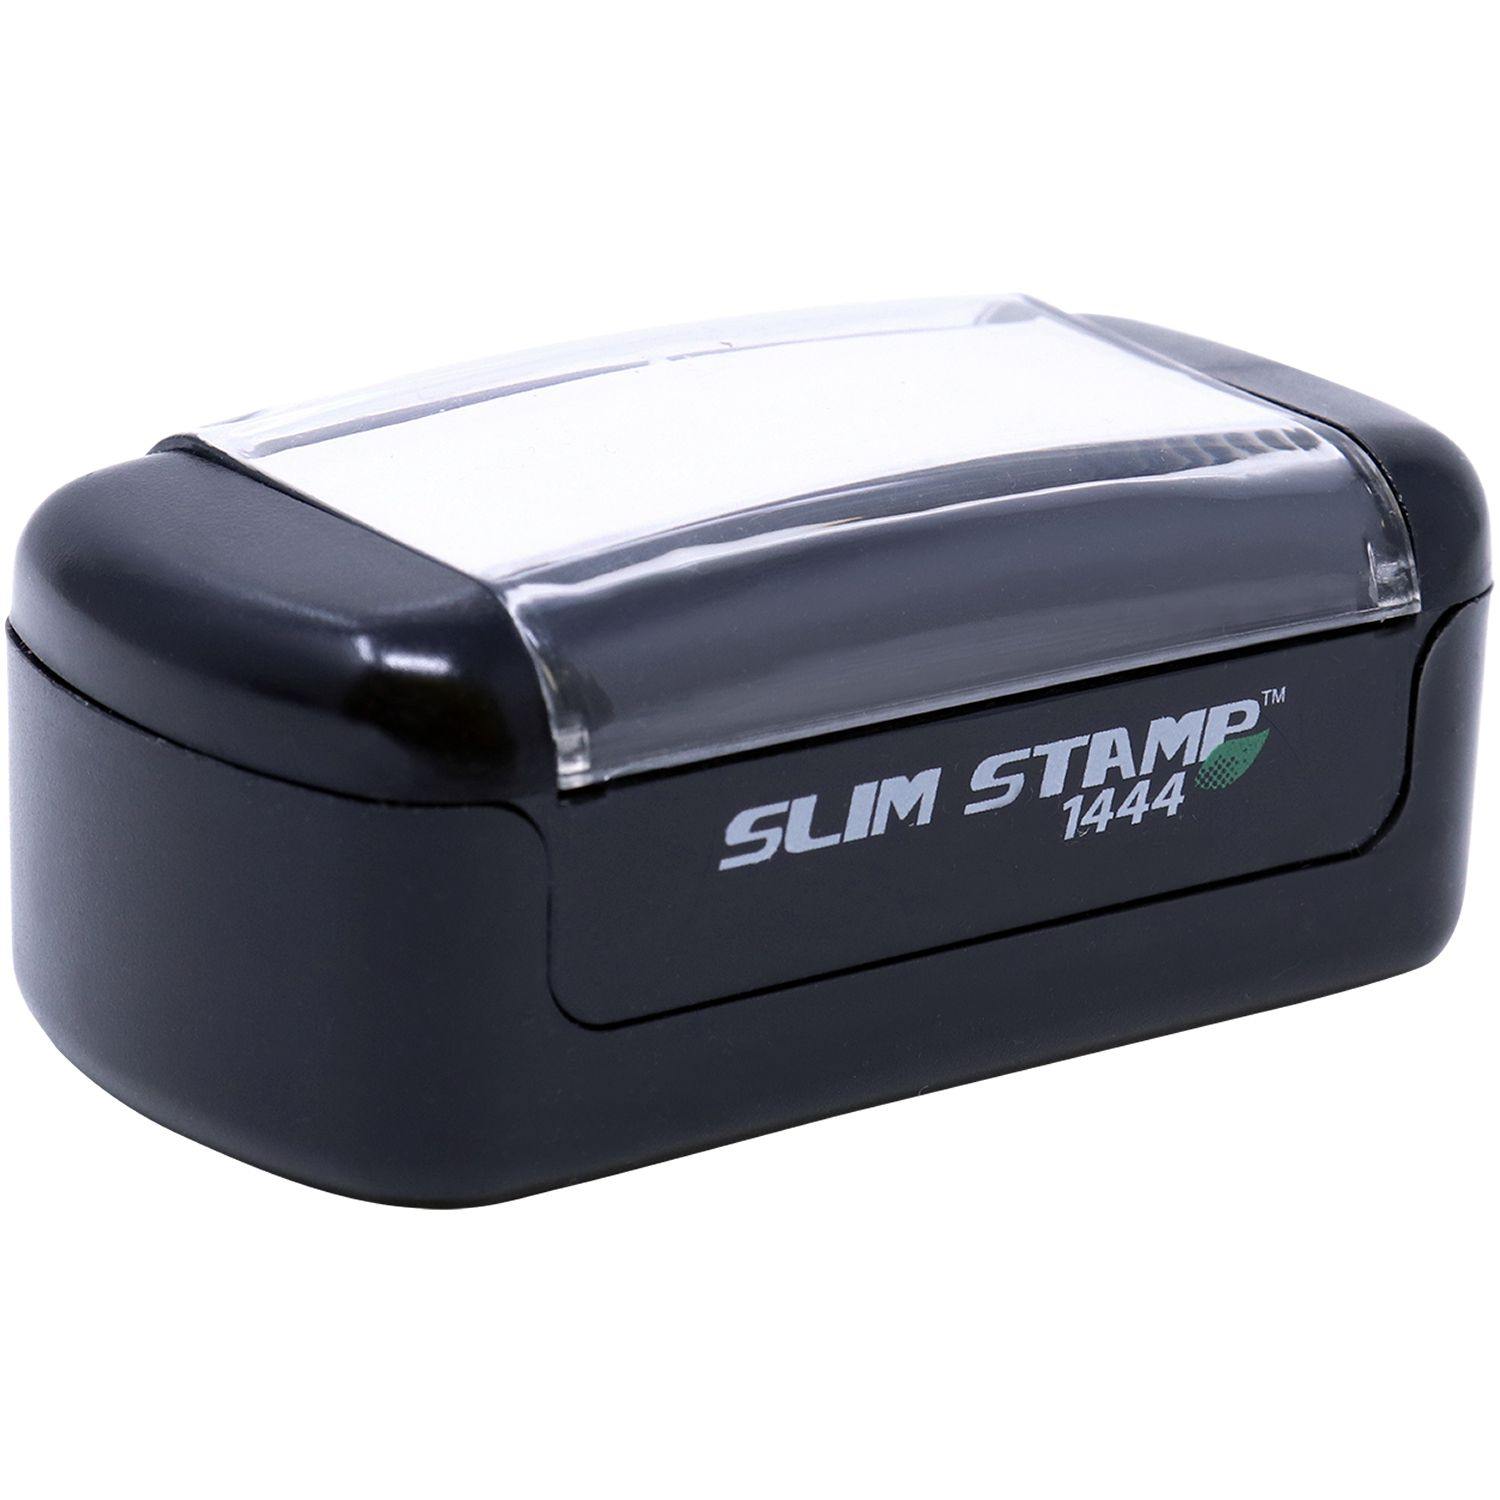 Alt View of Slim Pre Inked Validated Stamp Mount Angle